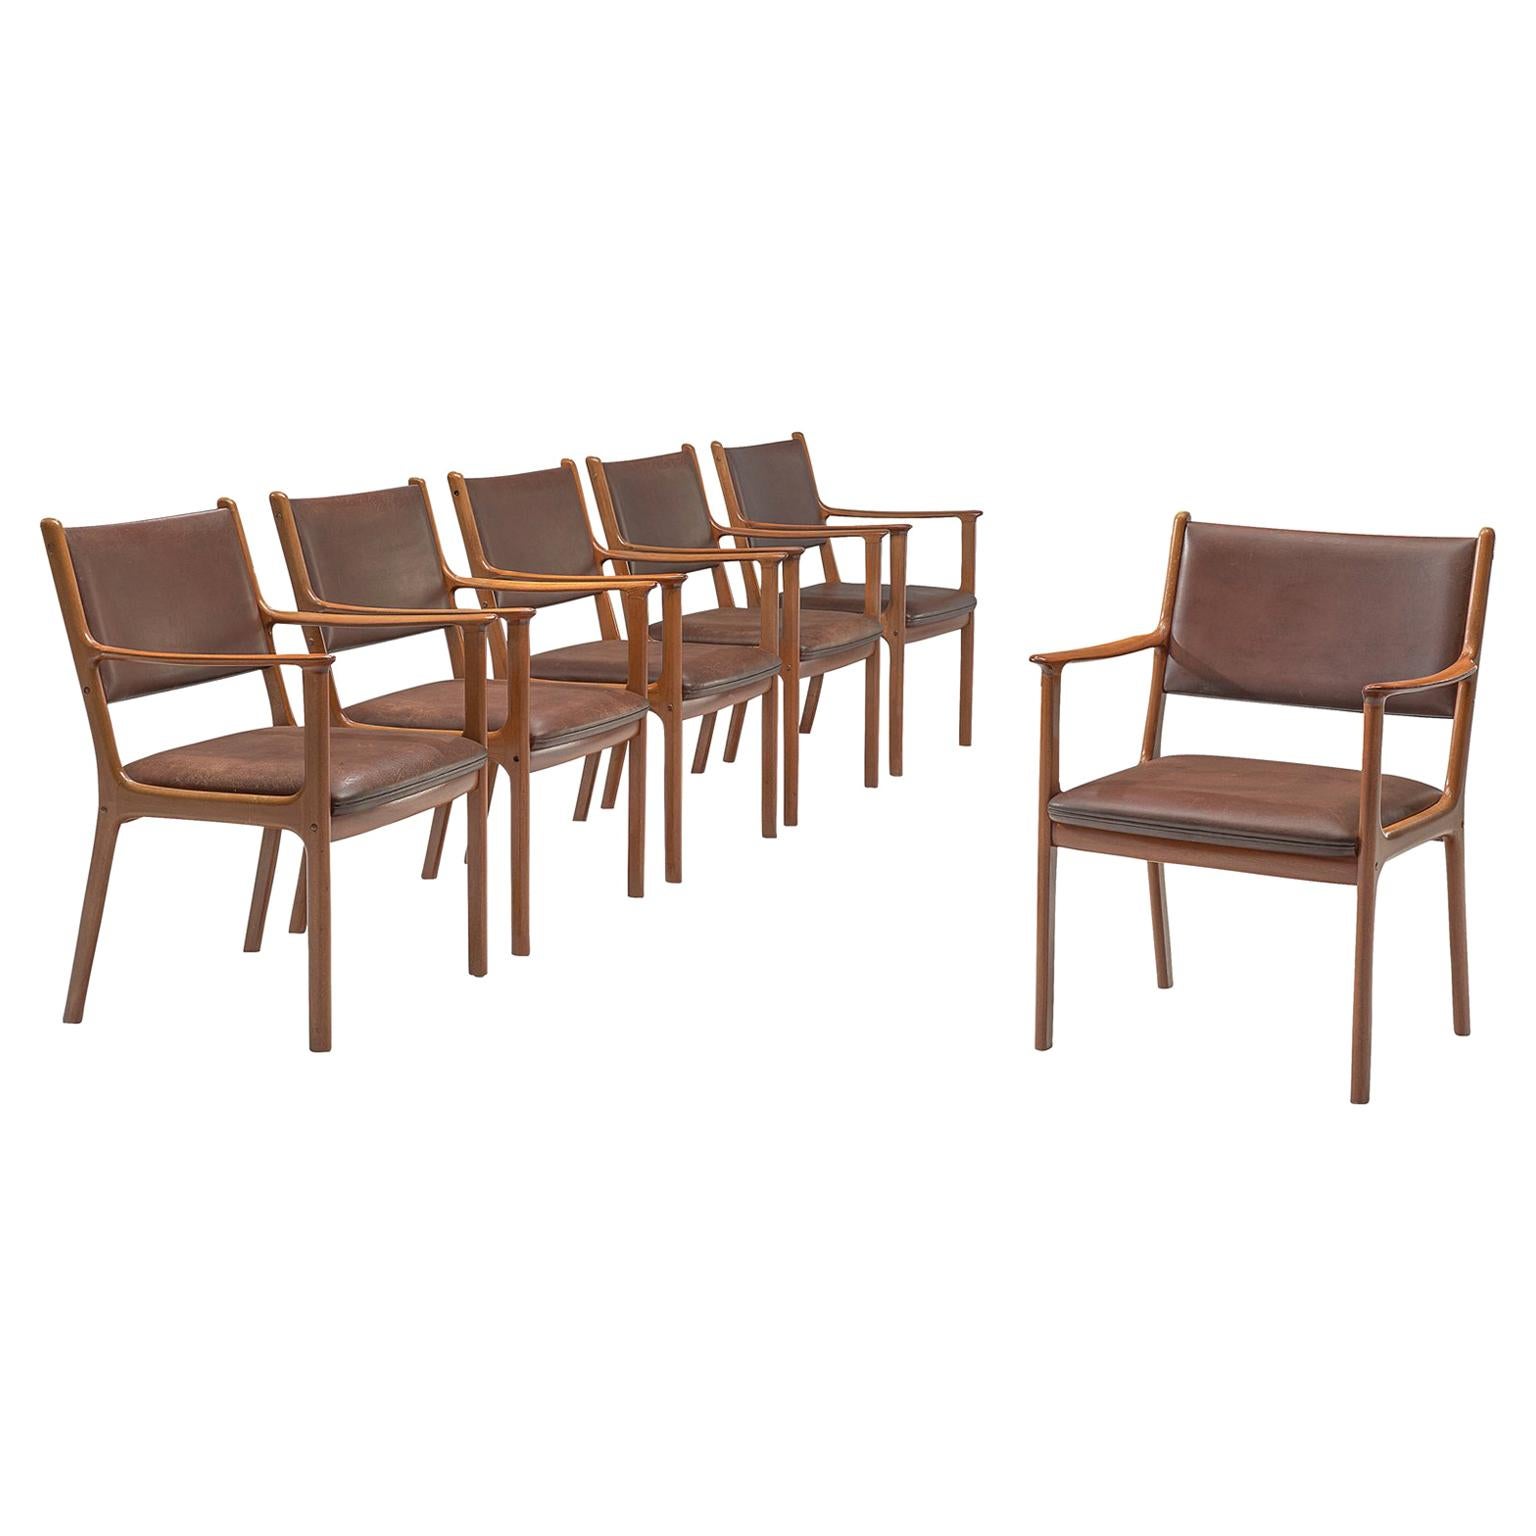 Ole Wanscher Set of Six 'PJ412' Armchairs in Teak and Brown Leather